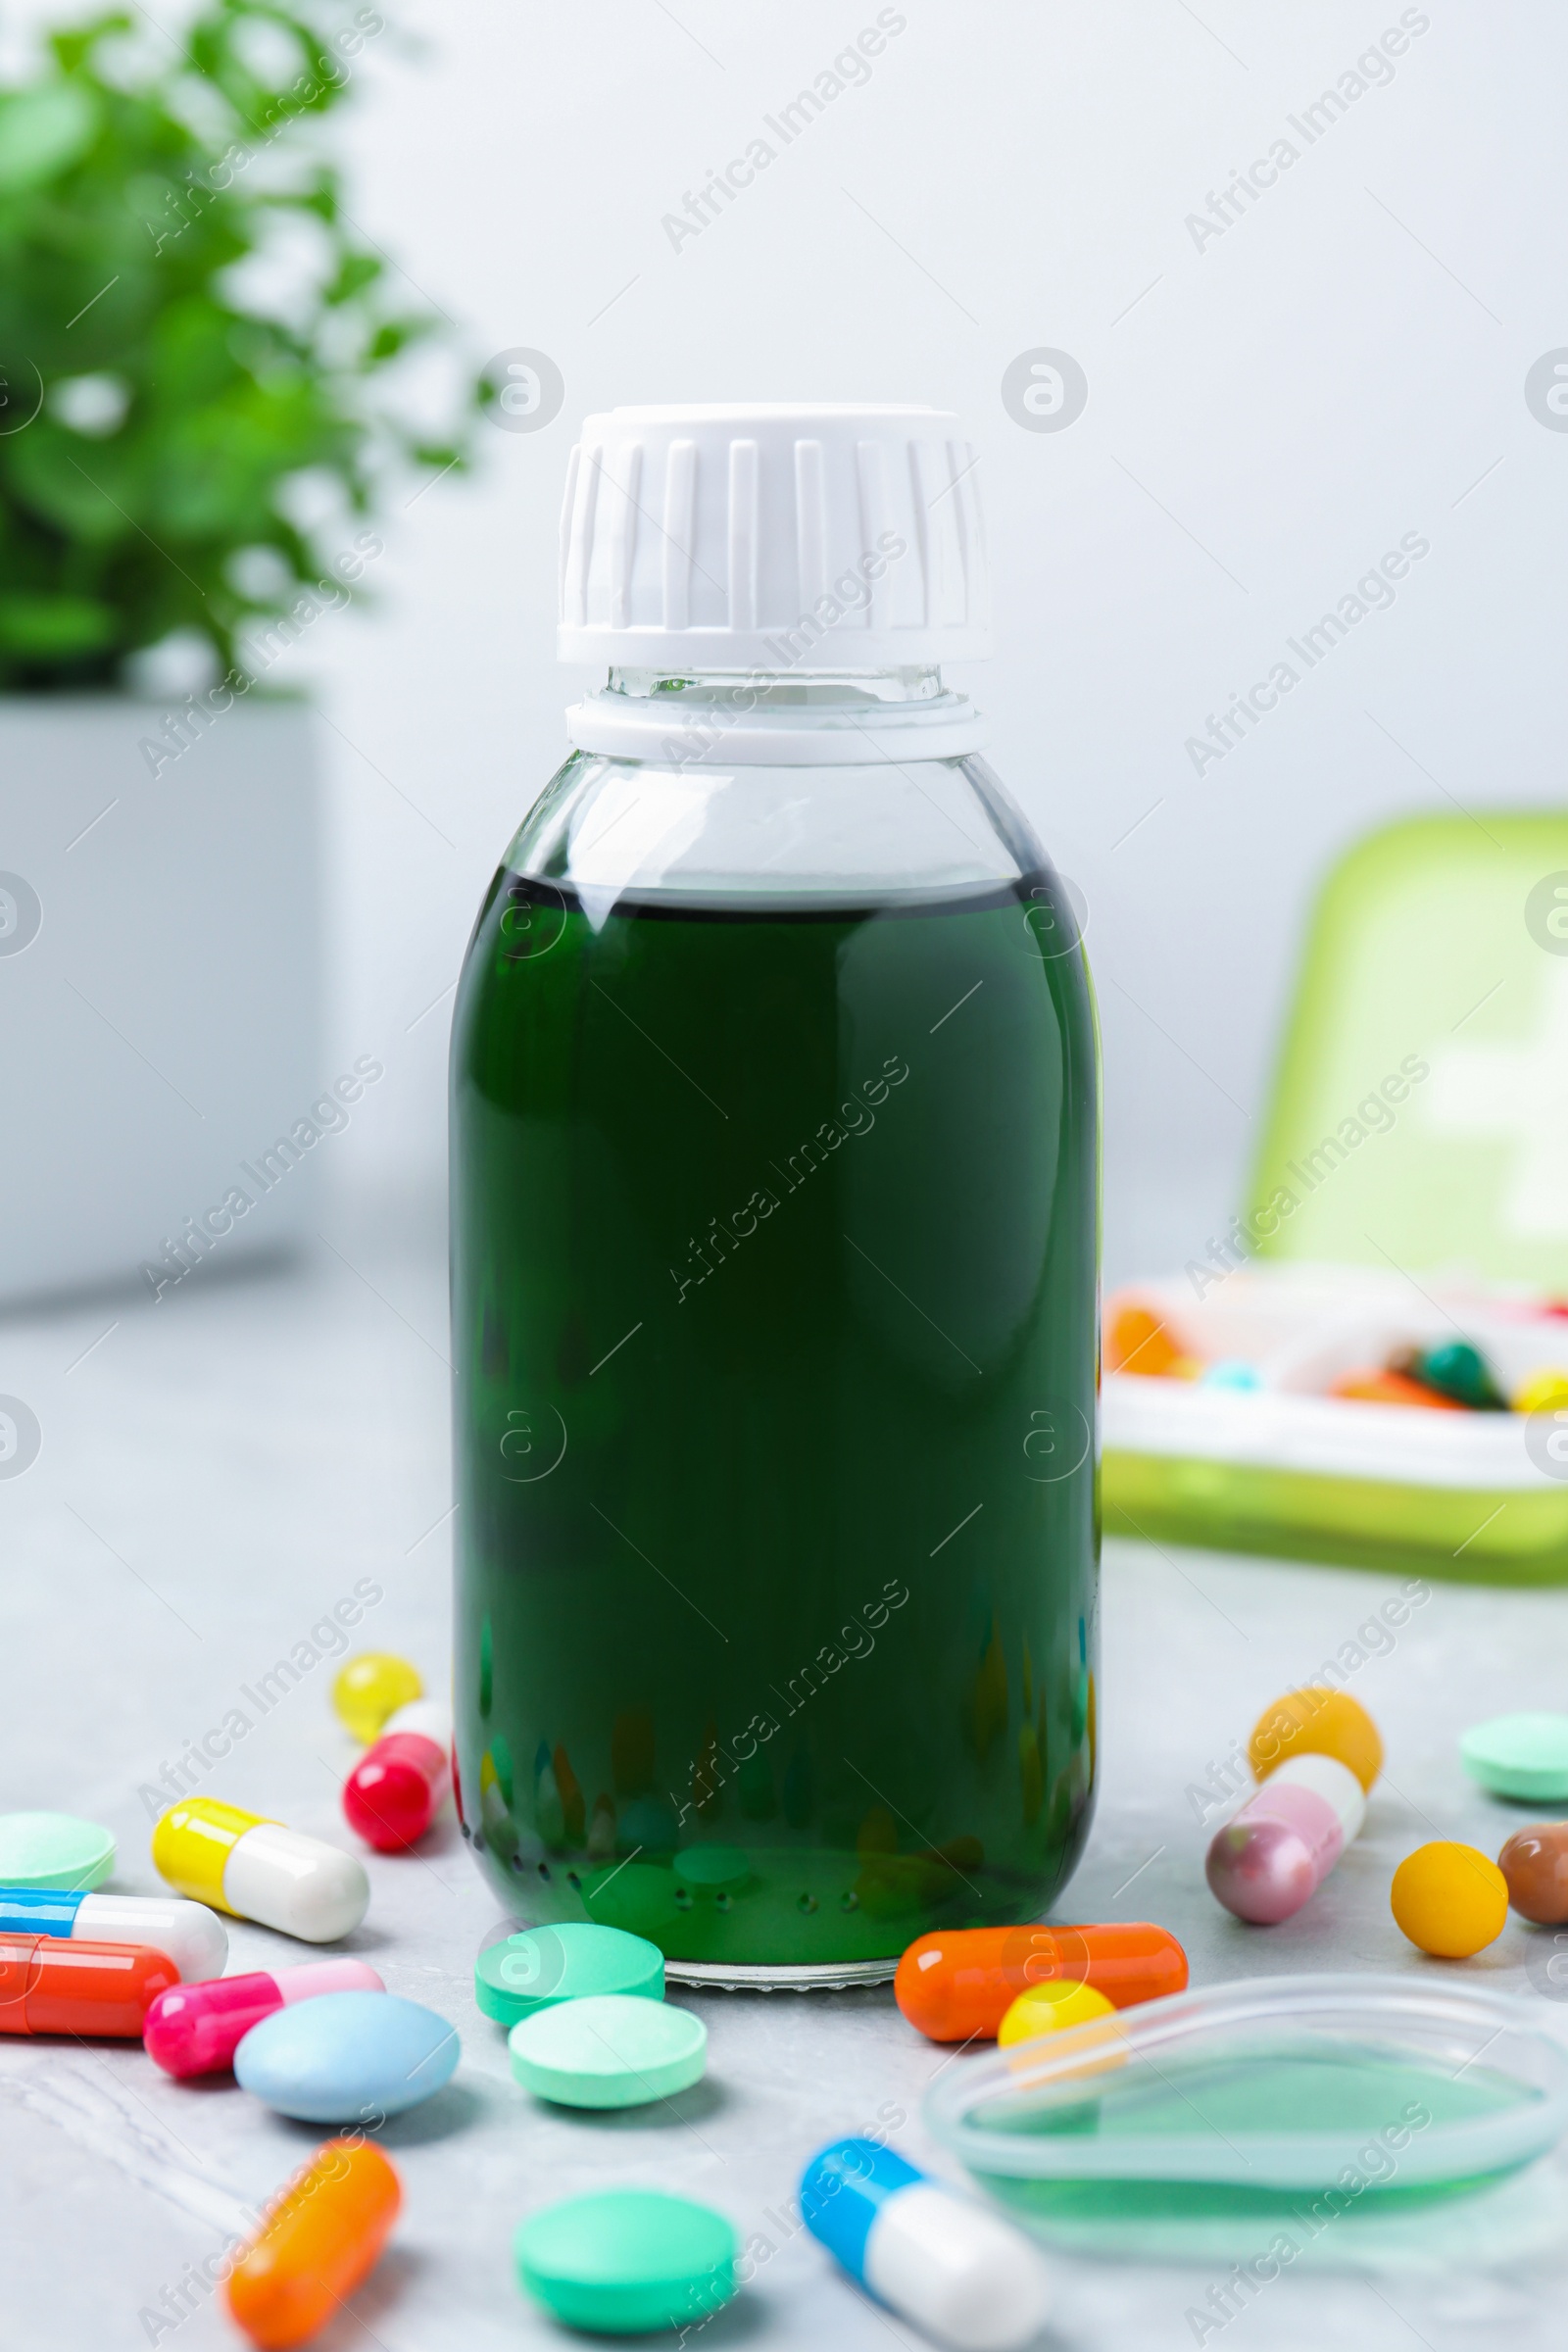 Photo of Bottle of syrup, dosing spoon and pills on white table. Cold medicine